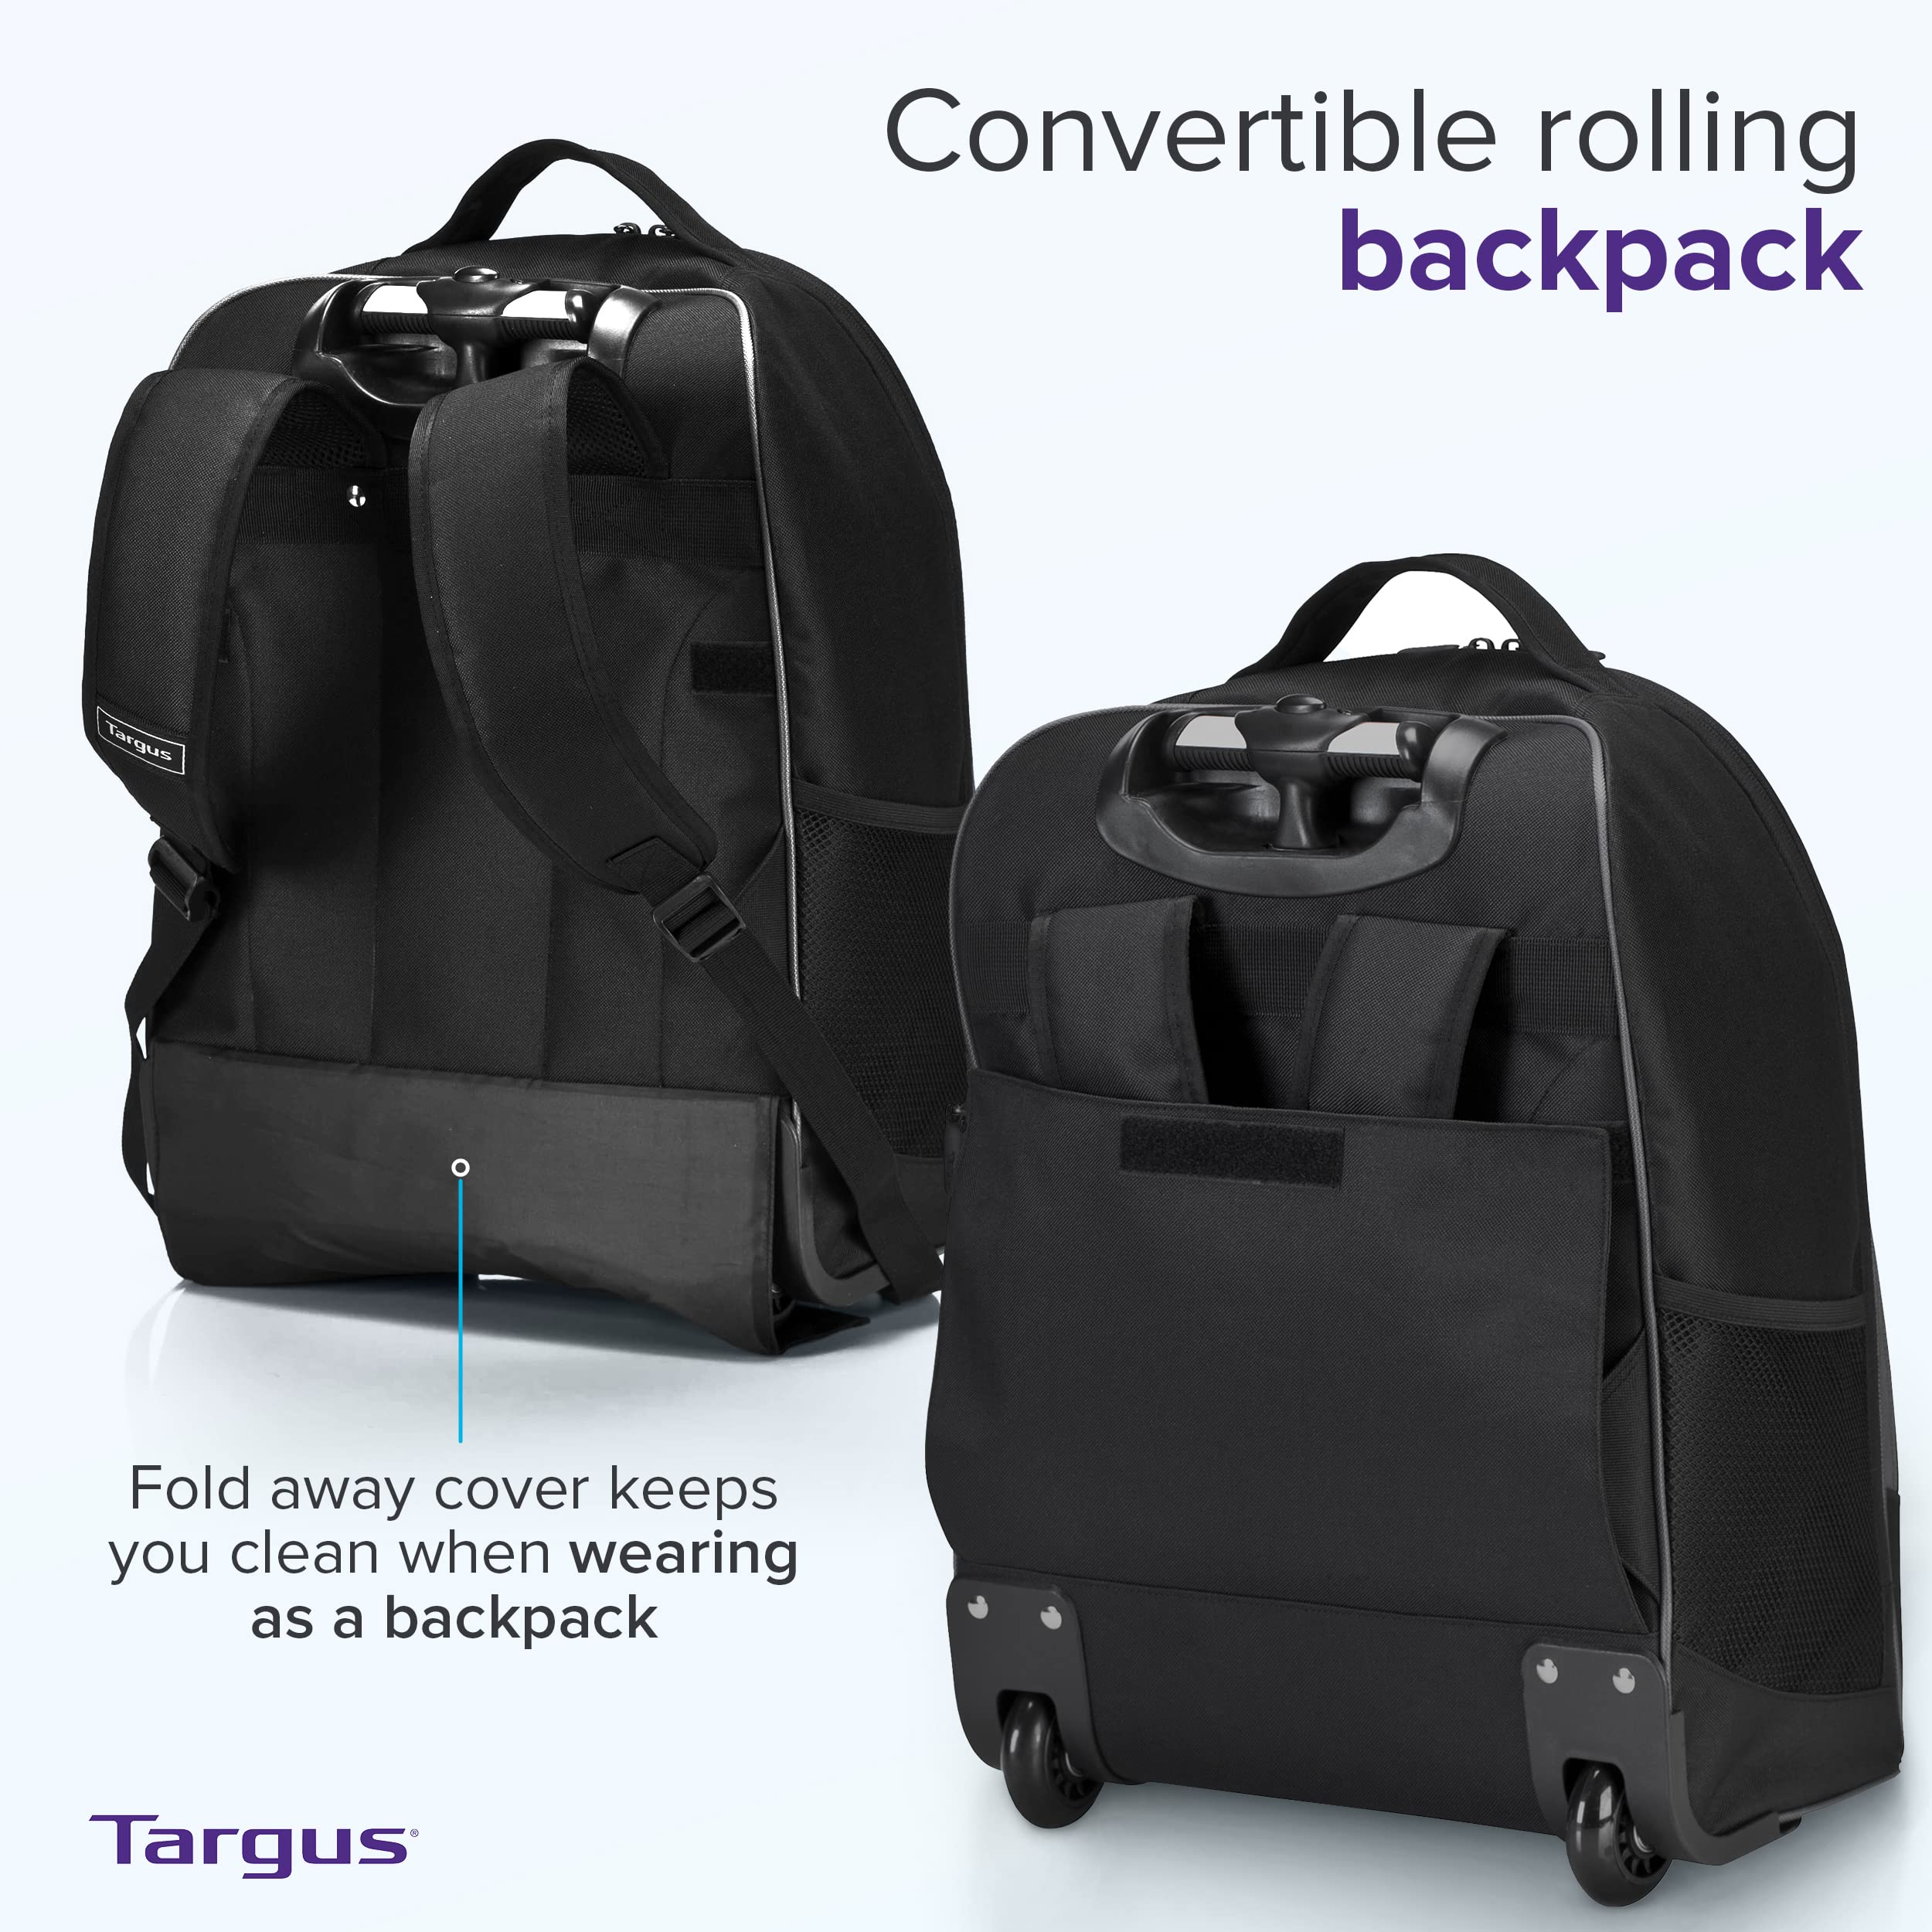 Targus 16 Inch Compact Rolling Backpack, Black - Wheeled Travel Bag with Removable Protective Laptop Sleeve, Fits Laptops Up to 16” and MacBook Pros up to 17” (TSB750US)